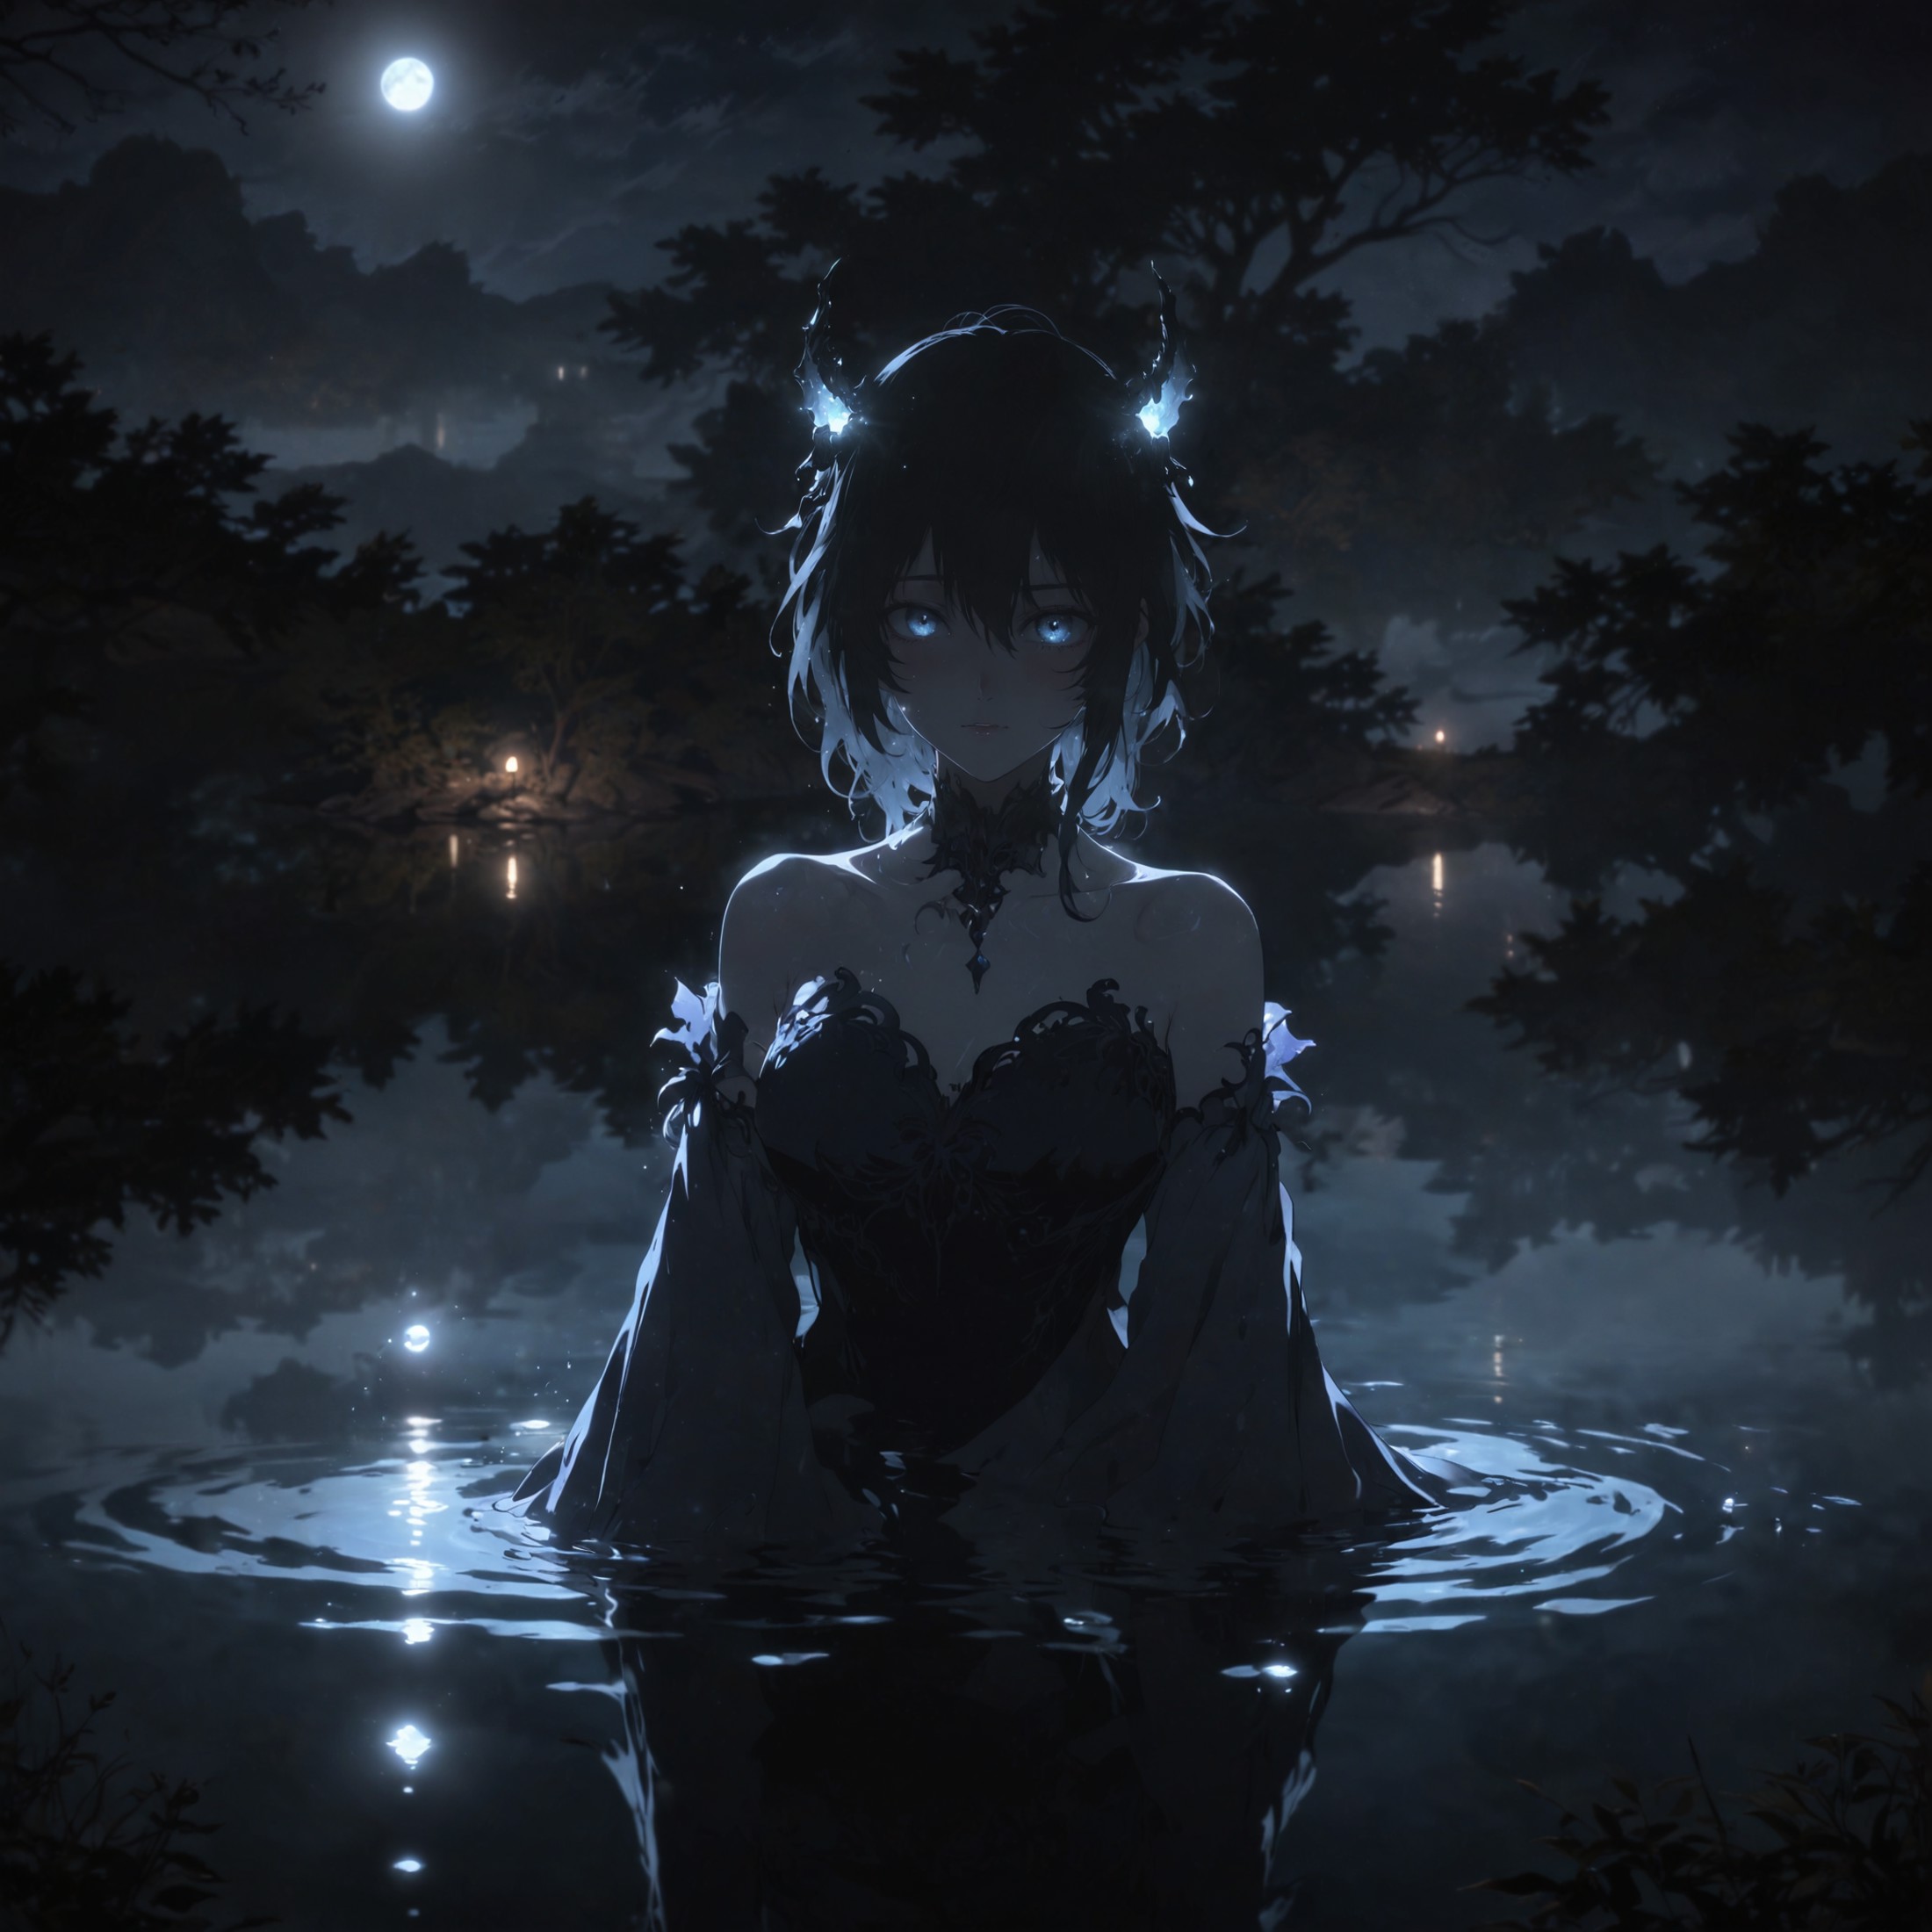 night time, glowing anomaly, elegant, lake, reflection, anime style, demon under the water